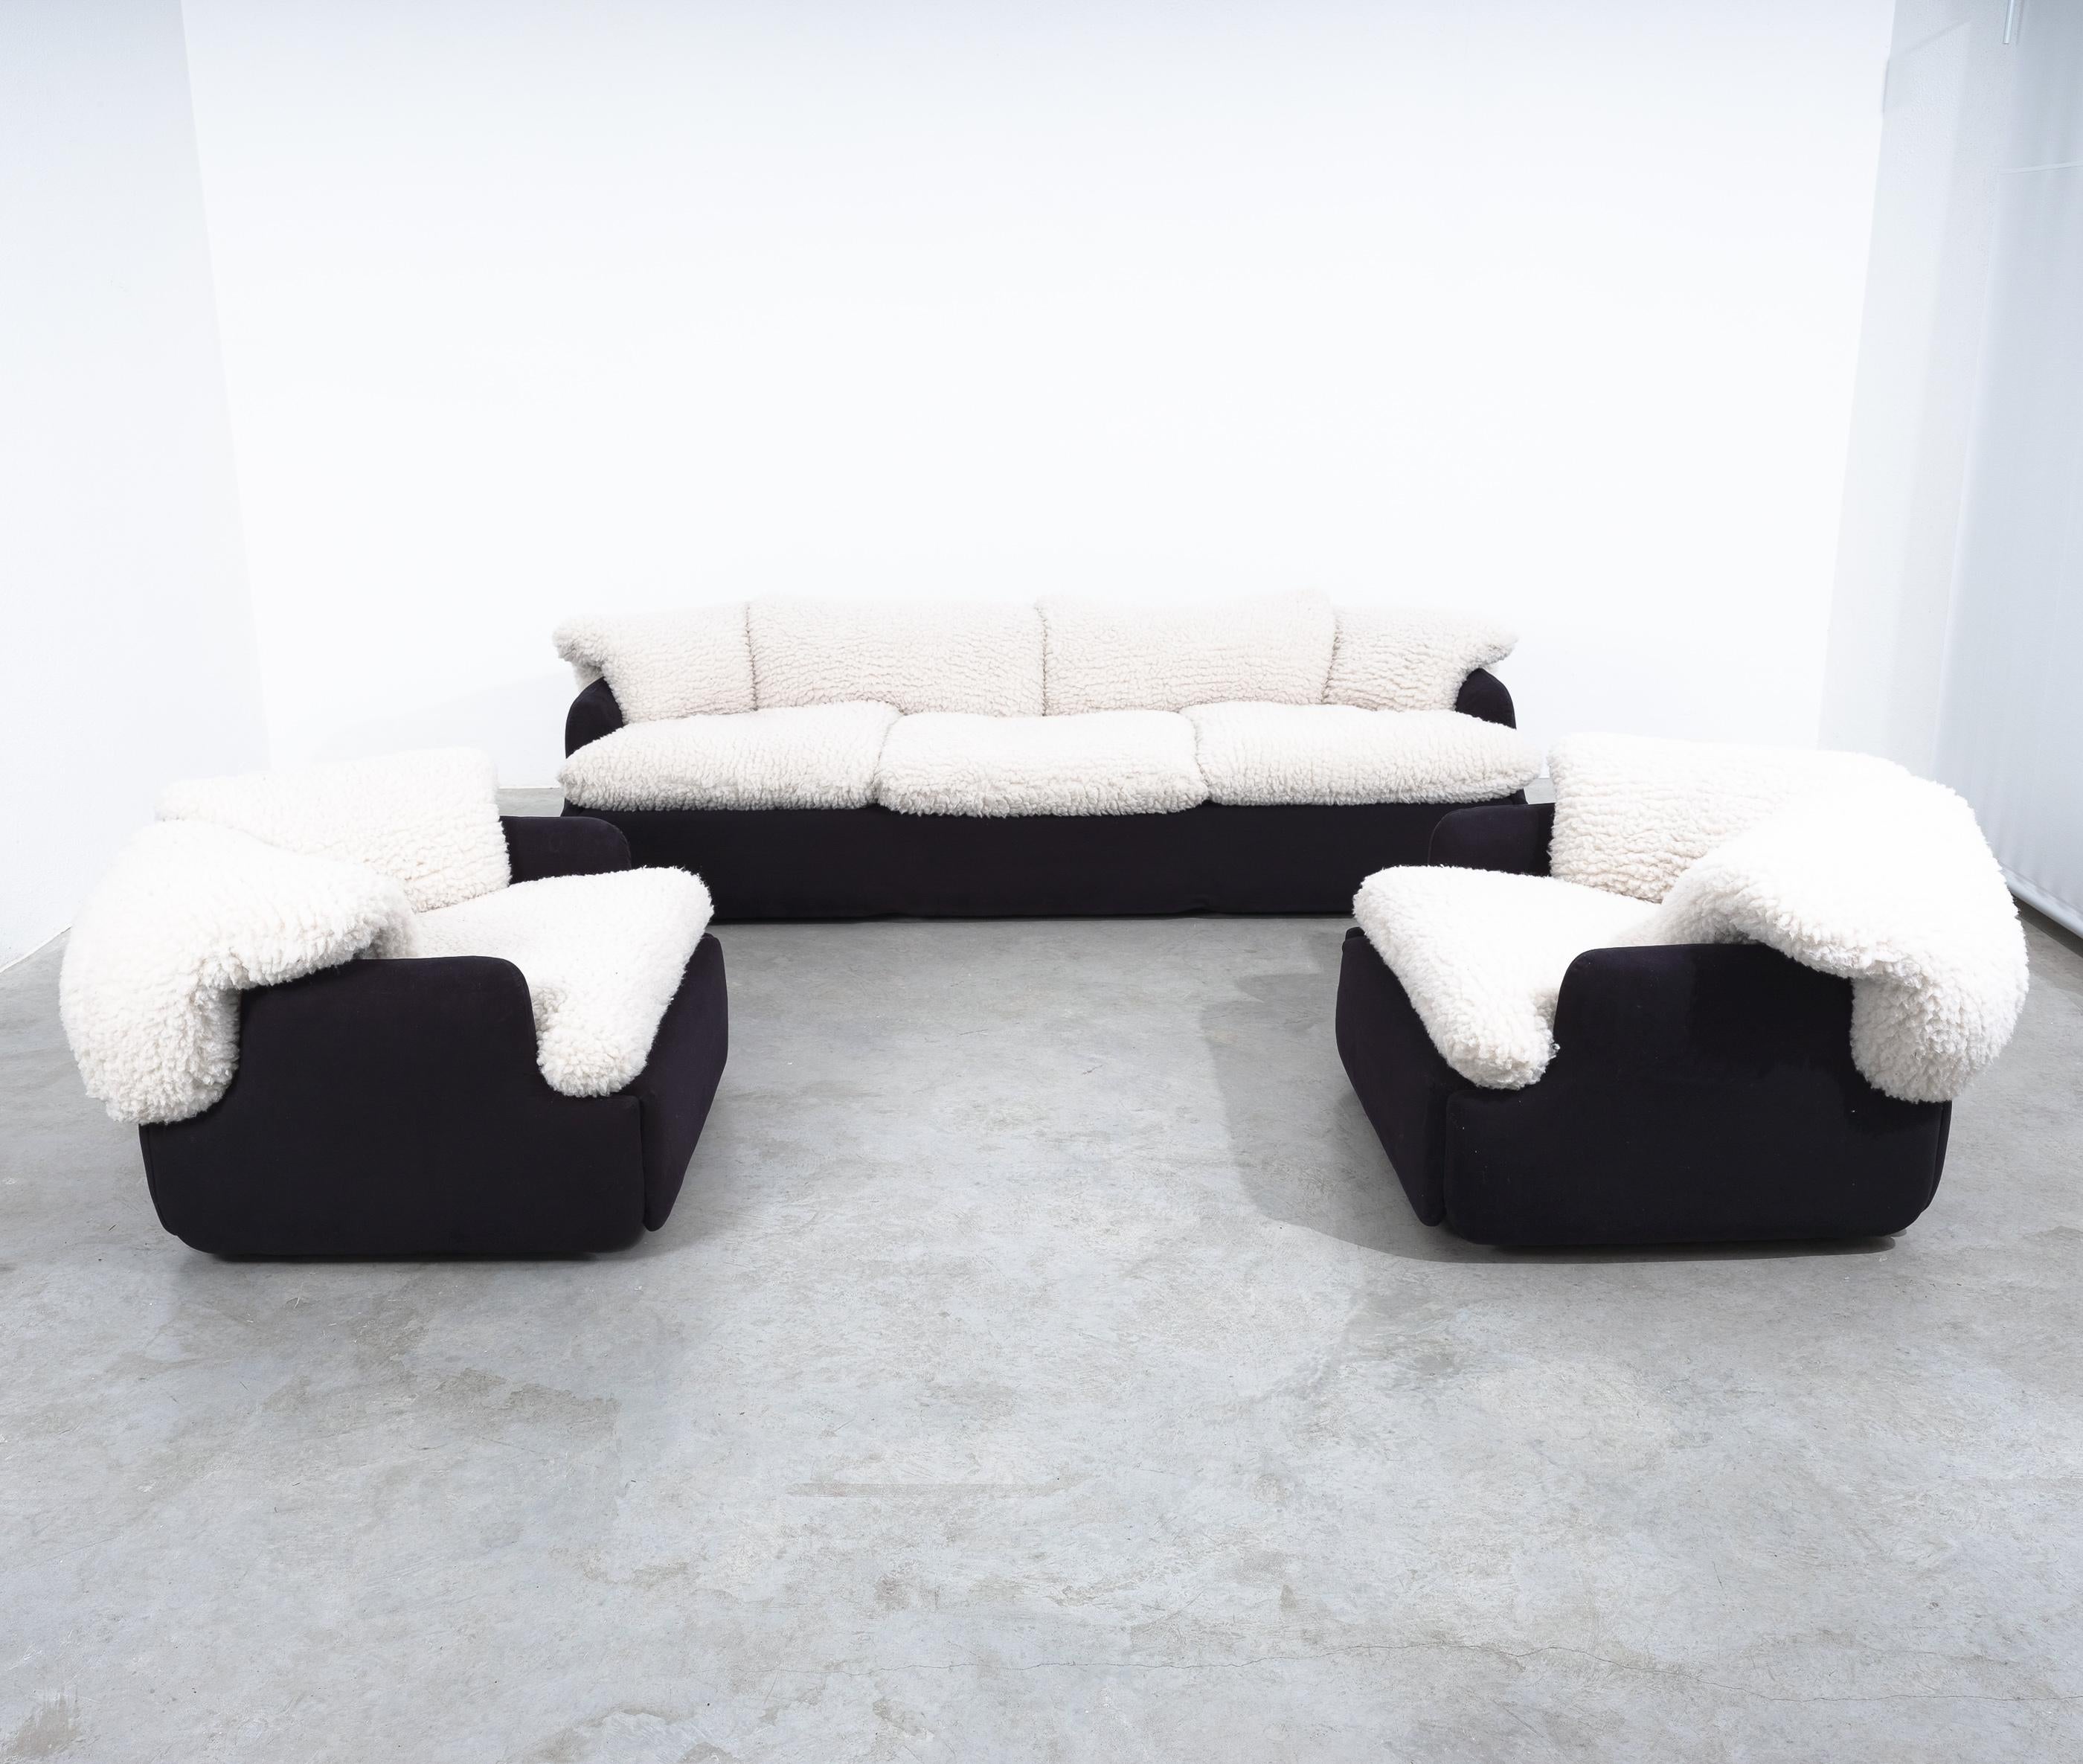 Sofa and chair ensemble by Alberto Rosselli for Saporiti, “Confidential”, with an extraordinary, fluffy white wool upholstery, Italy, 1970. Very good condition.

Large sofa and 2 single chairs designed by Italian architect and furniture designer